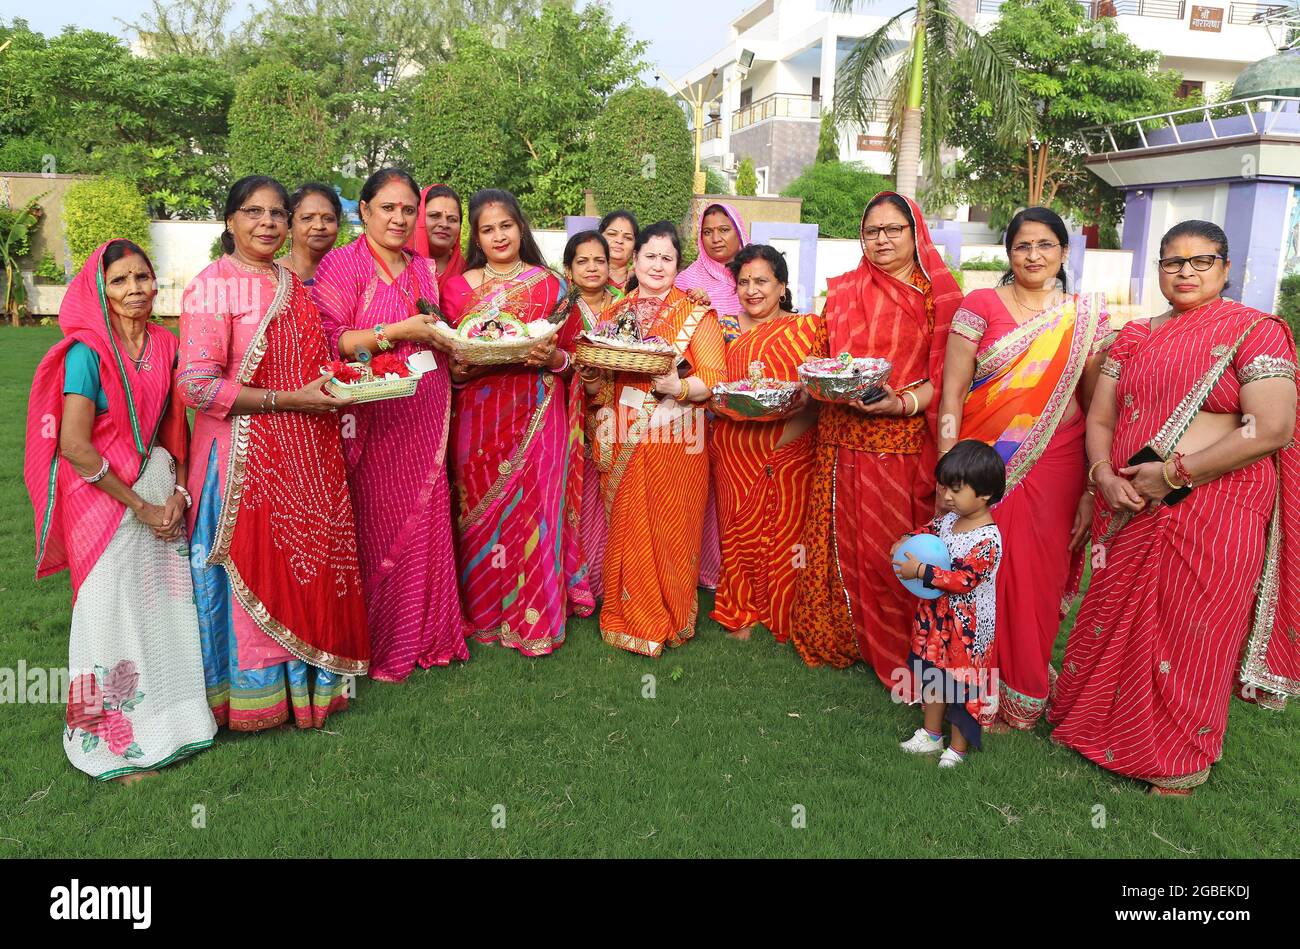 Beawar, India. 02nd Aug, 2021. Hindu women wearing colorful lahariya saree, pose for a picture with the idols of Laddu Gopal (Lord Krishna) as they celebrate the holy month of Sawan (Shravan) in Beawar. (Photo by Sumit Saraswat/Pacific Press) Credit: Pacific Press Media Production Corp./Alamy Live News Stock Photo